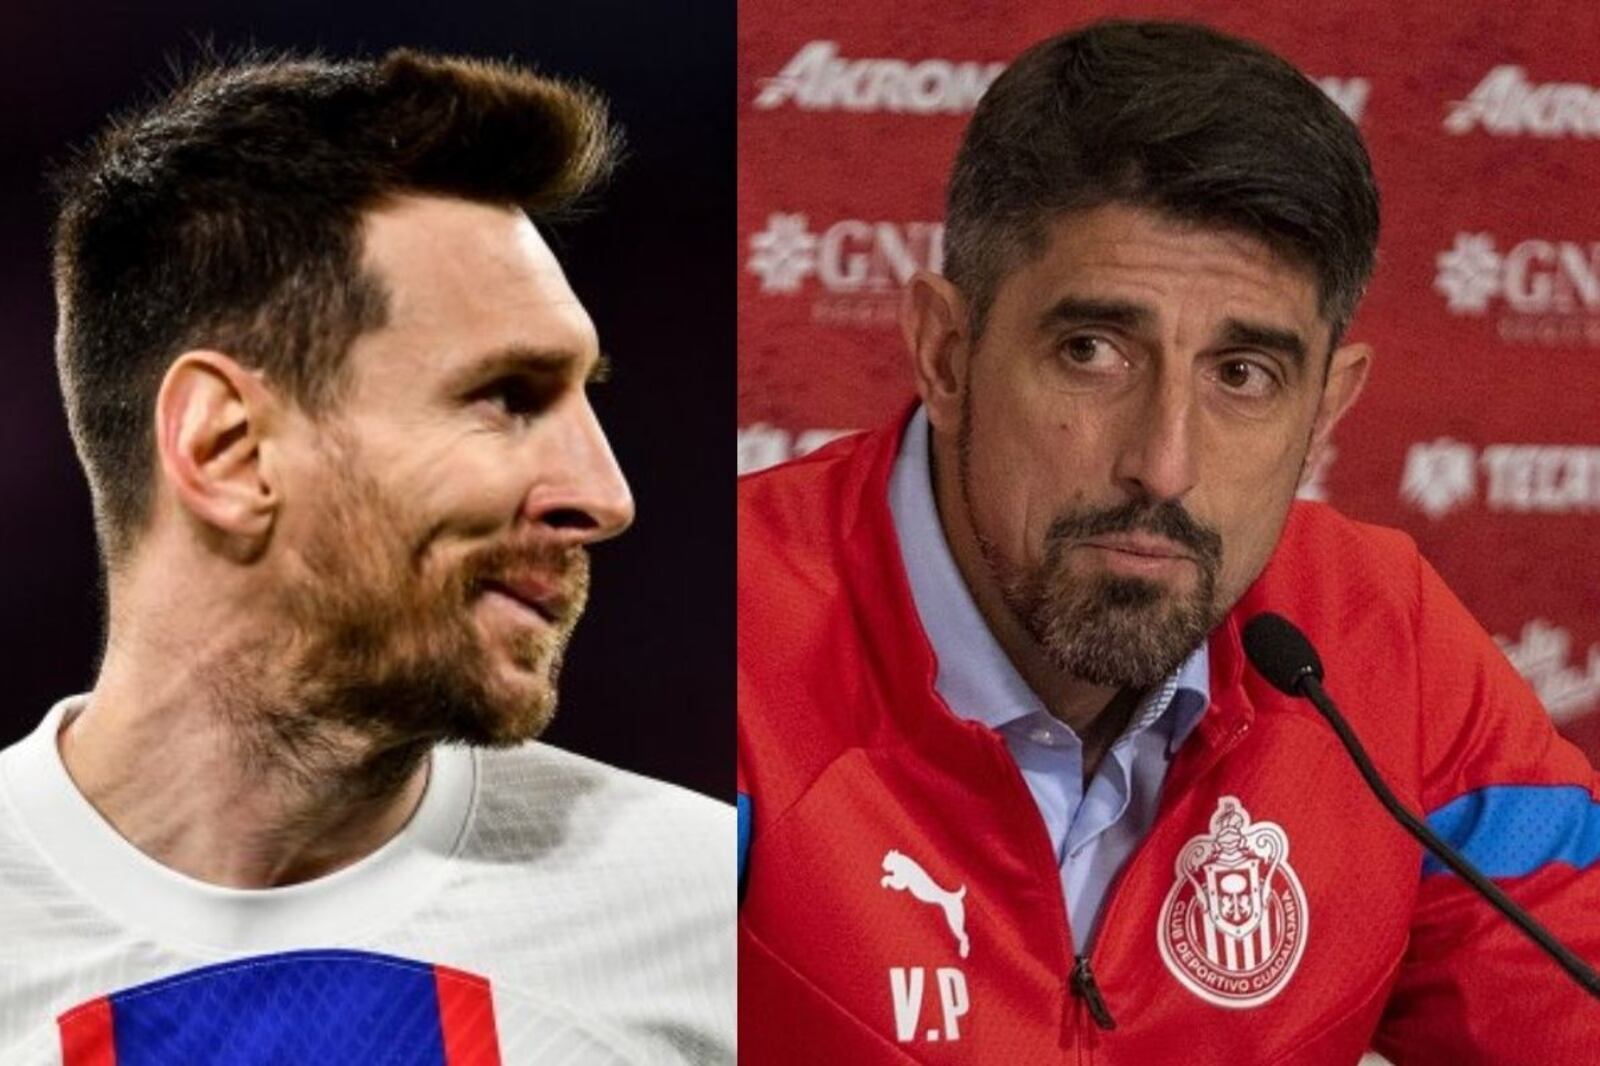 Paunovic would leave Chivas and could lead Lionel Messi in a surprising way